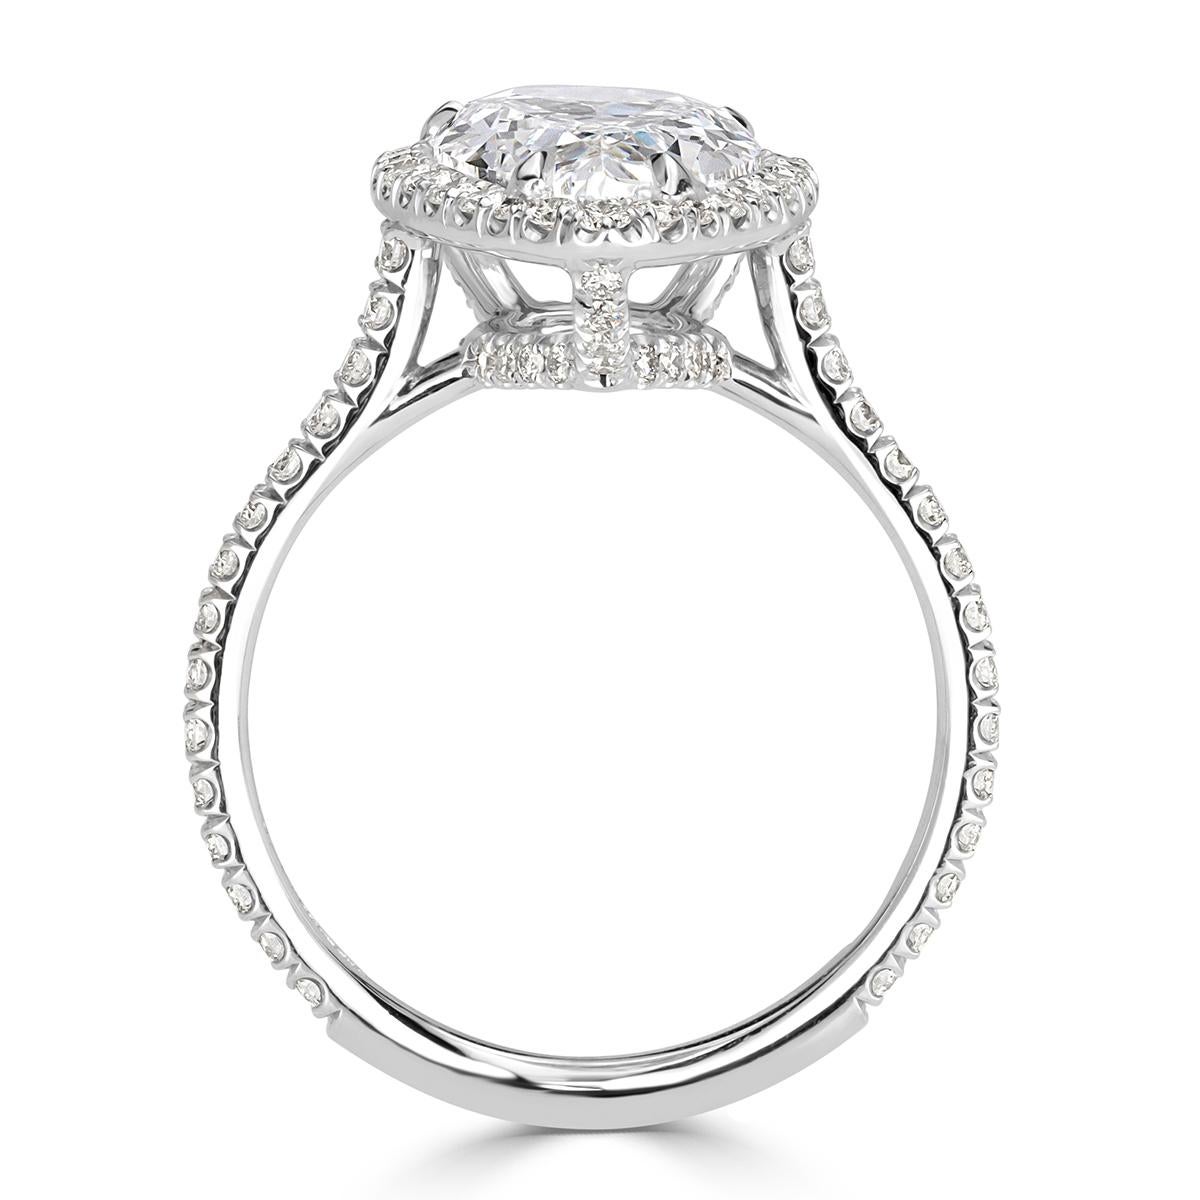 This mesmerizing beauty showcases an exceptional 2.46ct pear shaped center diamond, GIA certified at E-SI2. It faces up peerless white and completely eye-clean with minimal white inclusions. It is accented by a halo of round brilliant cut diamonds